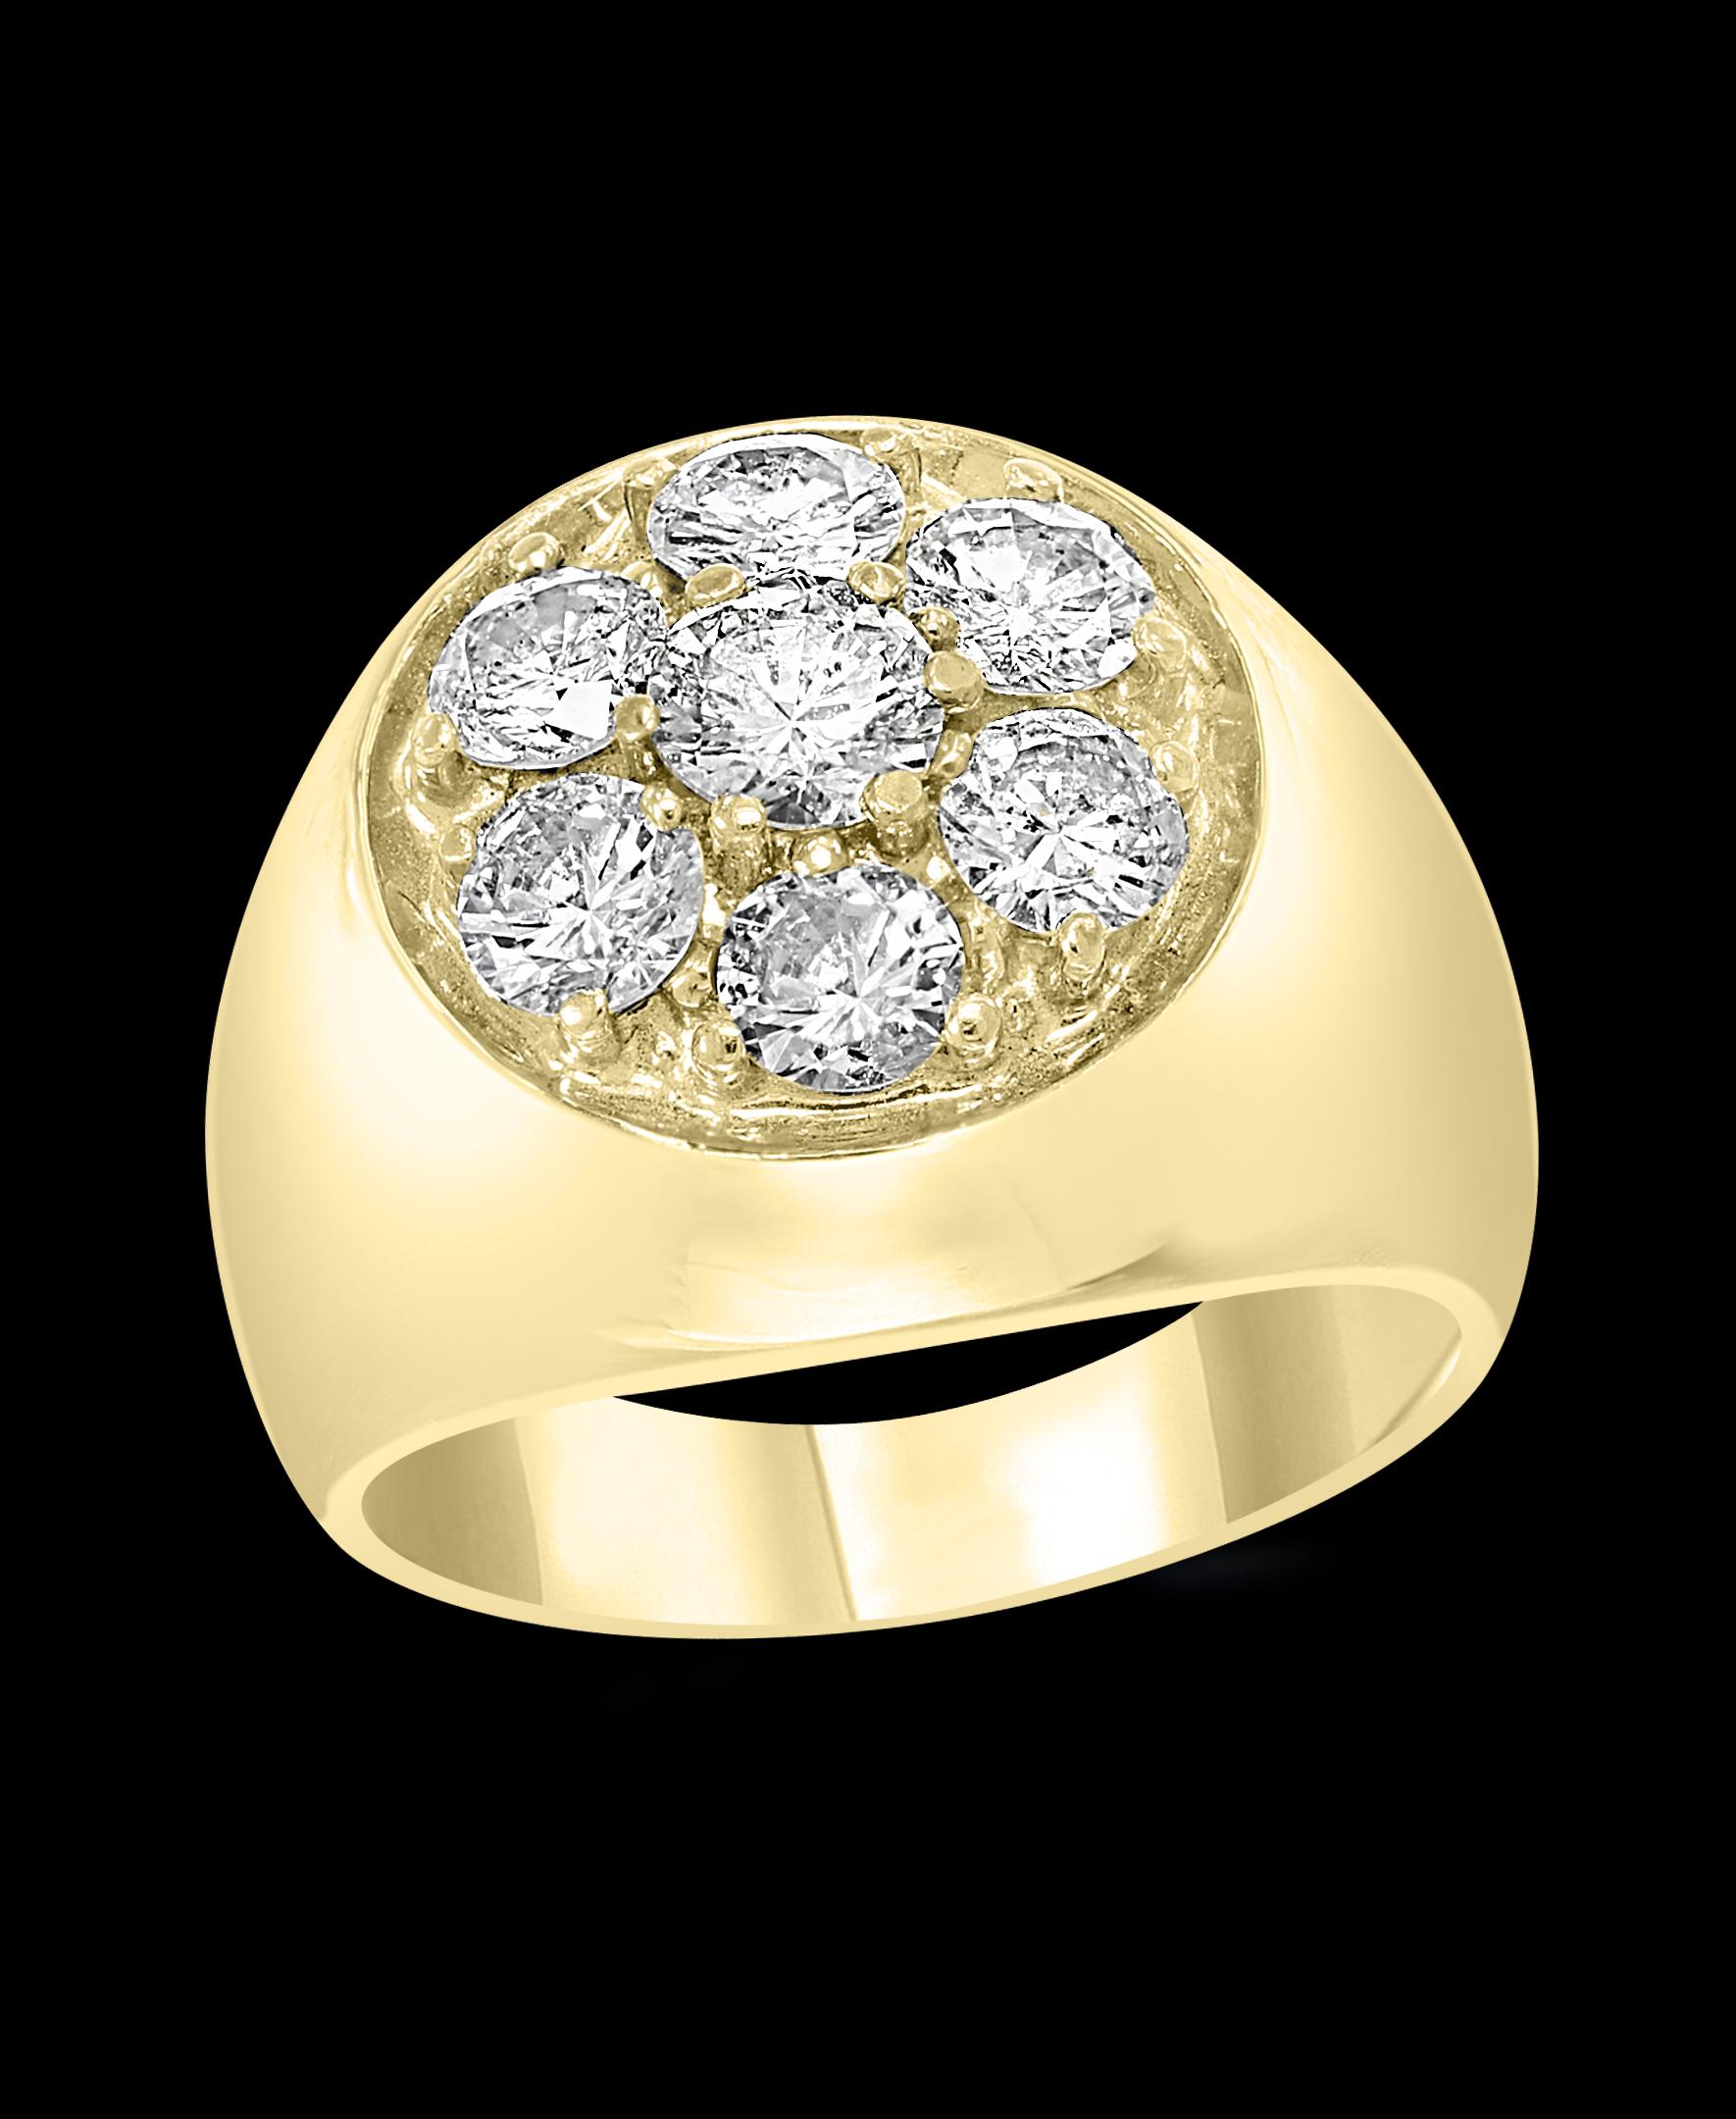 1.7 Carat 7 Diamonds  Traditional Men's Ring  14 Karat Yellow  Gold Ring Estate
This is a Nice traditional 7  diamond  ring  from our premium wedding collection for Men
 7  Round diamonds VS quality are set to make a Flower 
Diamonds : 1.75 Ct
Ring